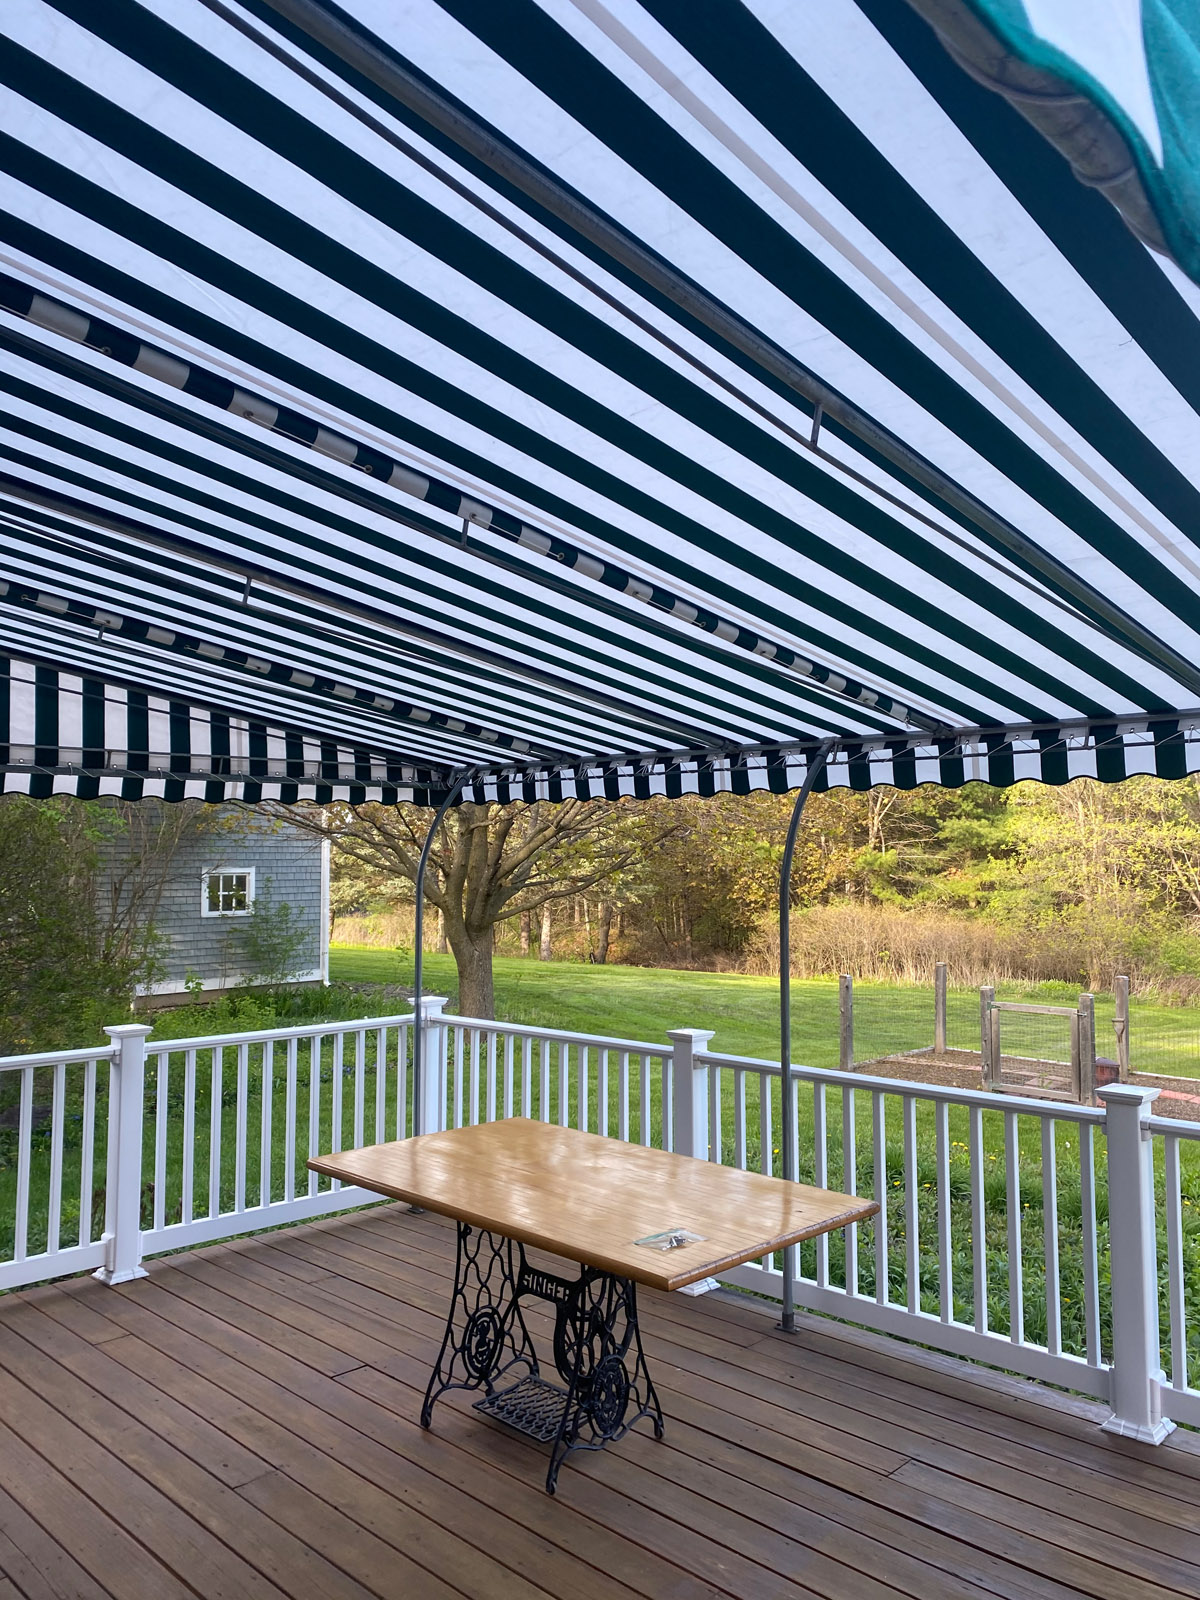 Striped awning over table and deck.